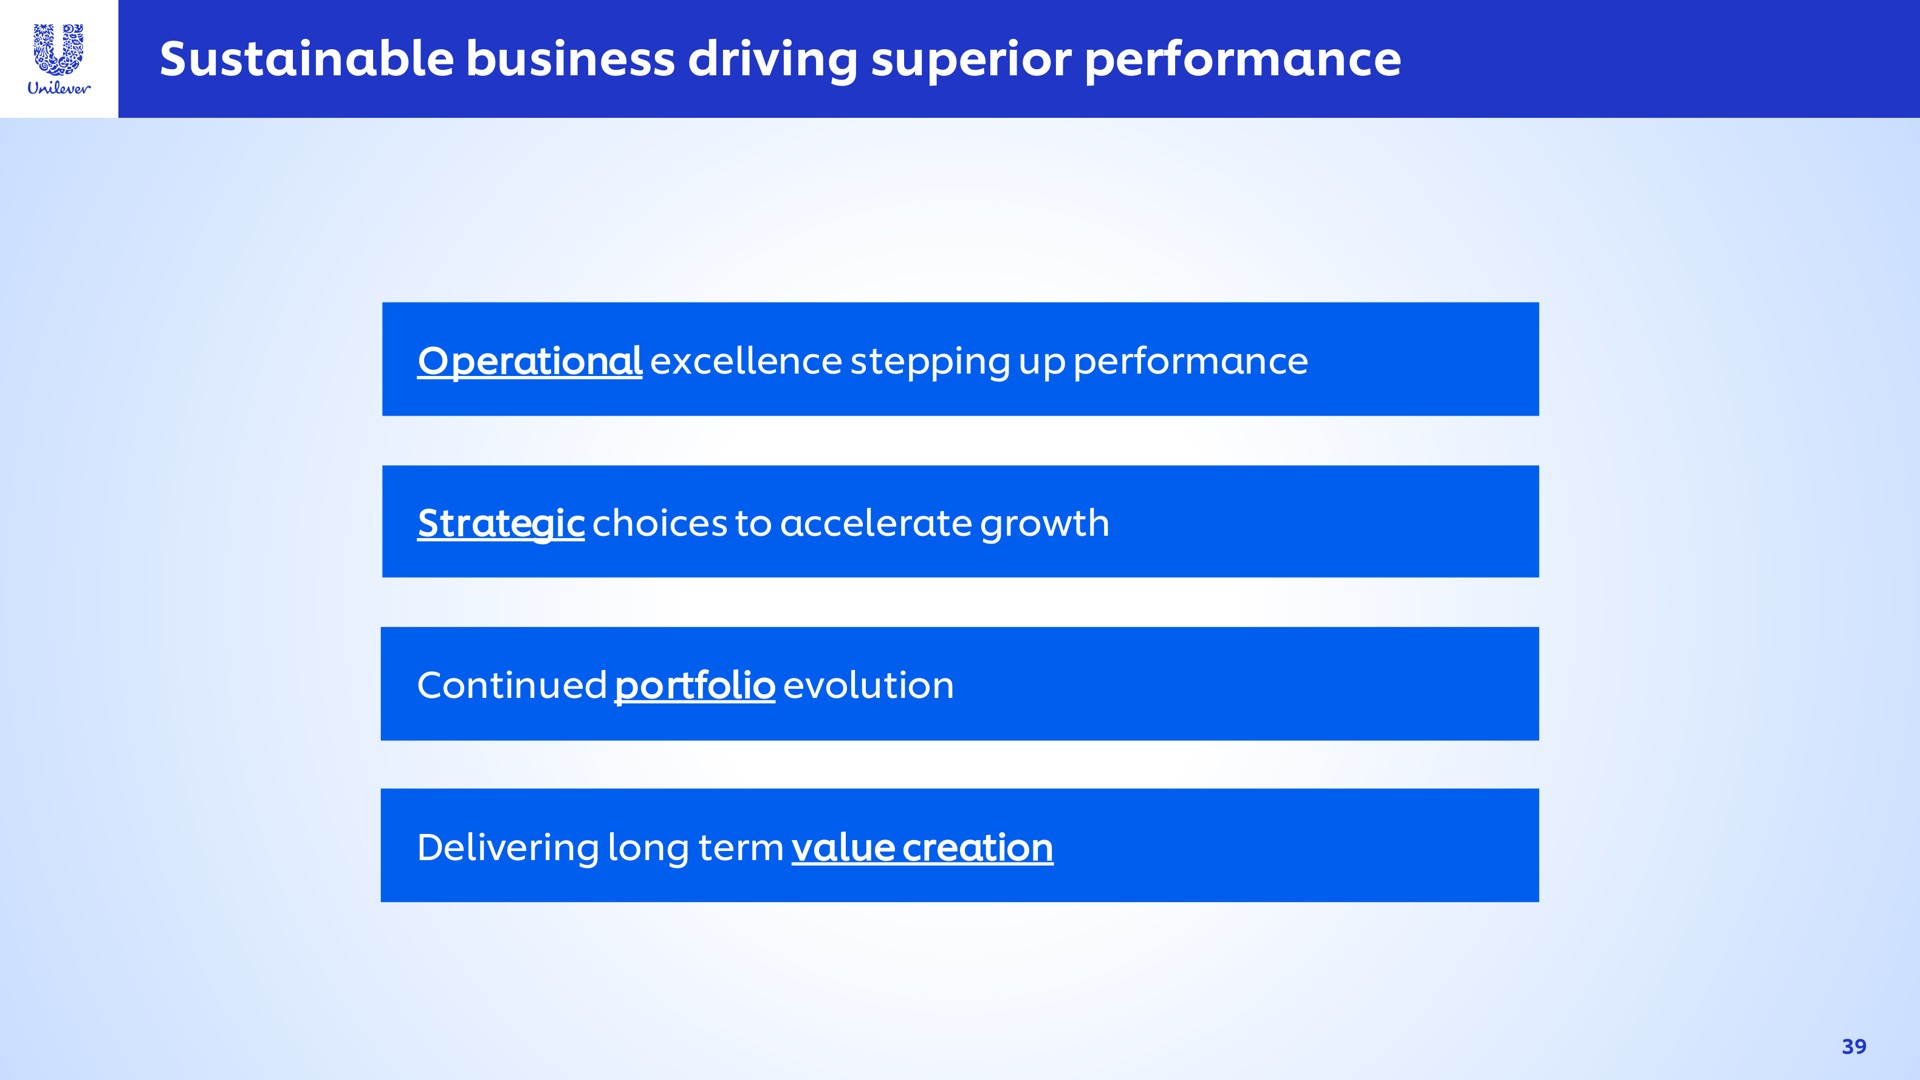 sustainable business driving superior performance strategic choices to accelerate growth operational excellence stepping up delivering long term value creation | Unilever